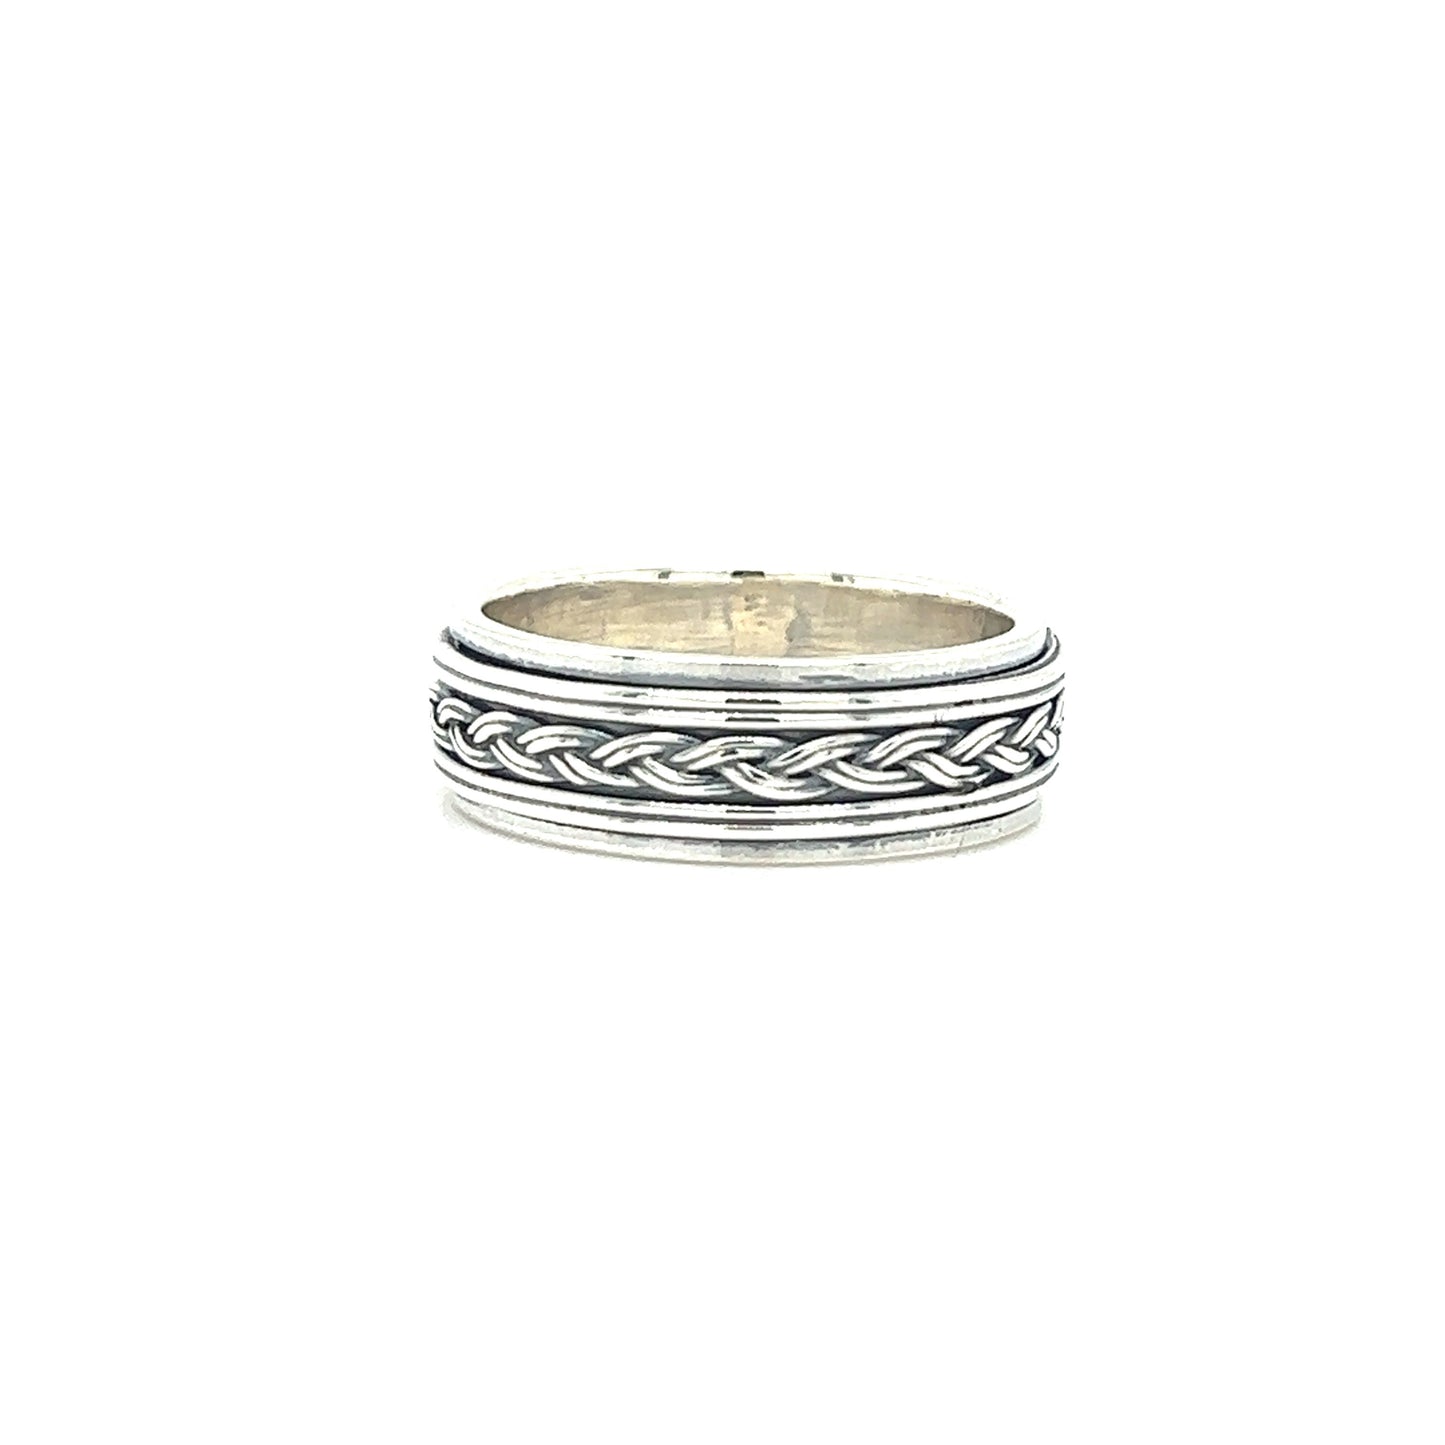 A minimalist Silver Rope Spinner Ring with a braided weave design.